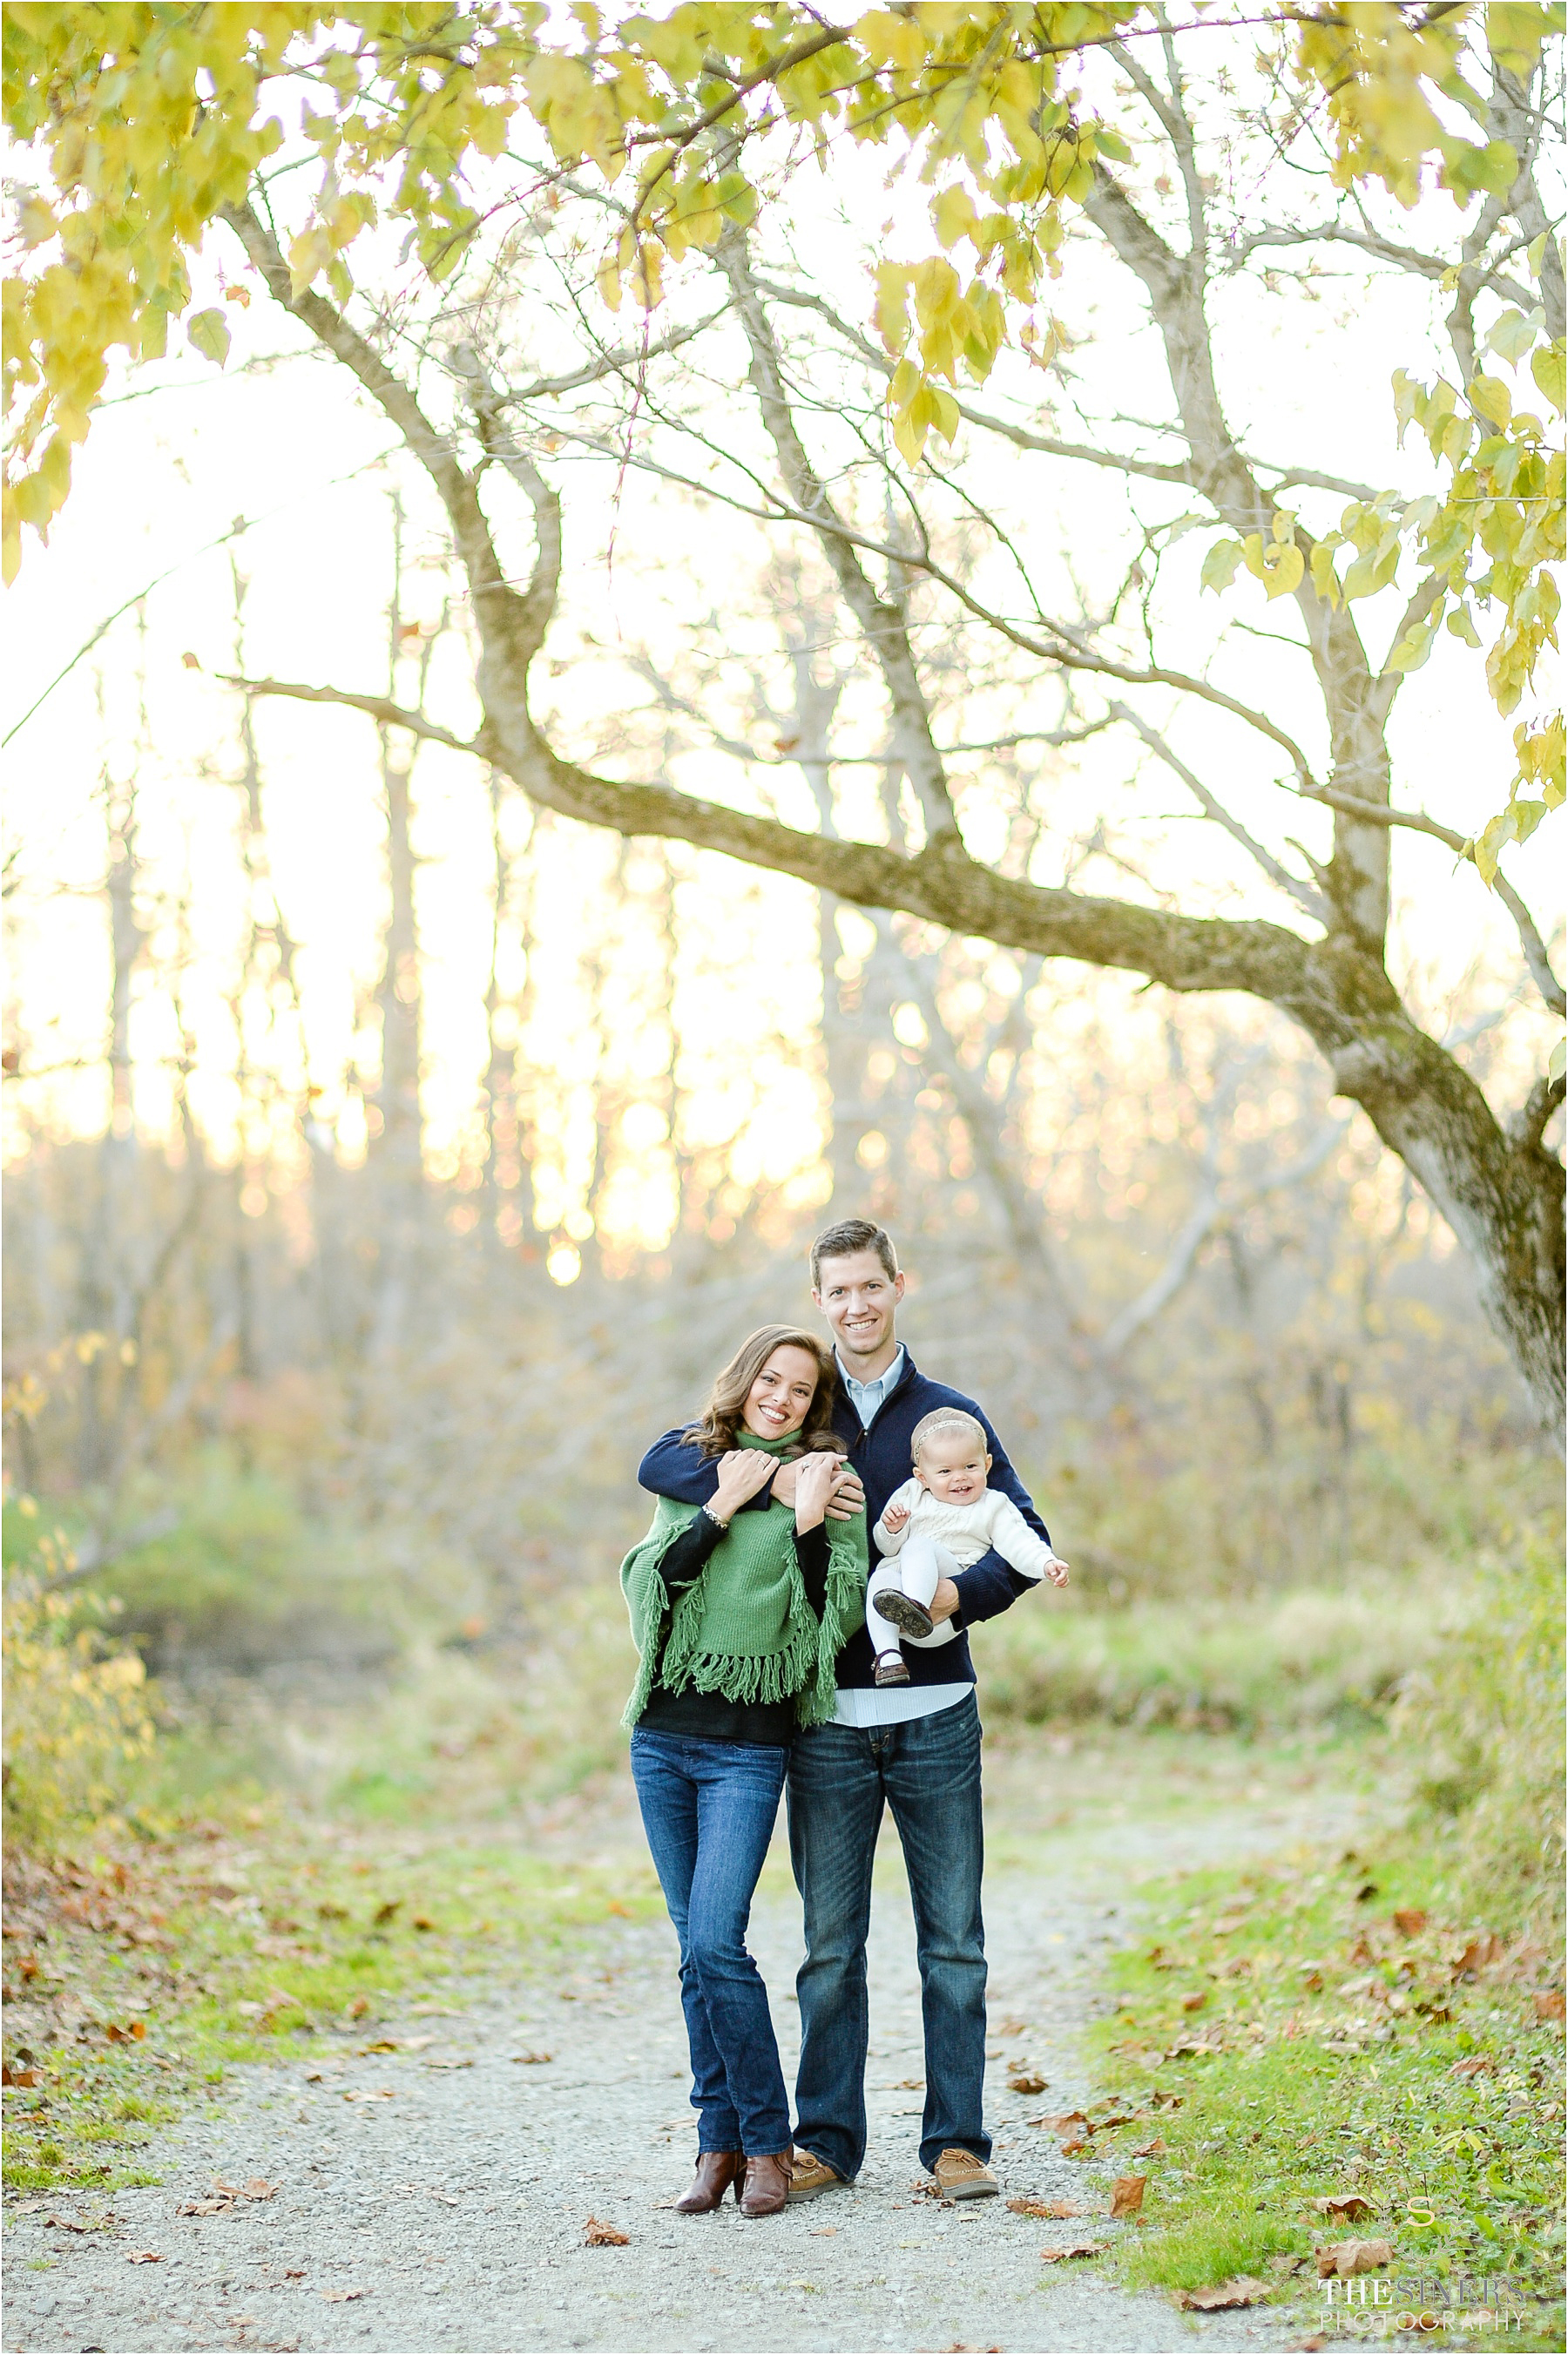 Irk Family_Indianapolis Family Photographer_TheSinersPhotography_0001